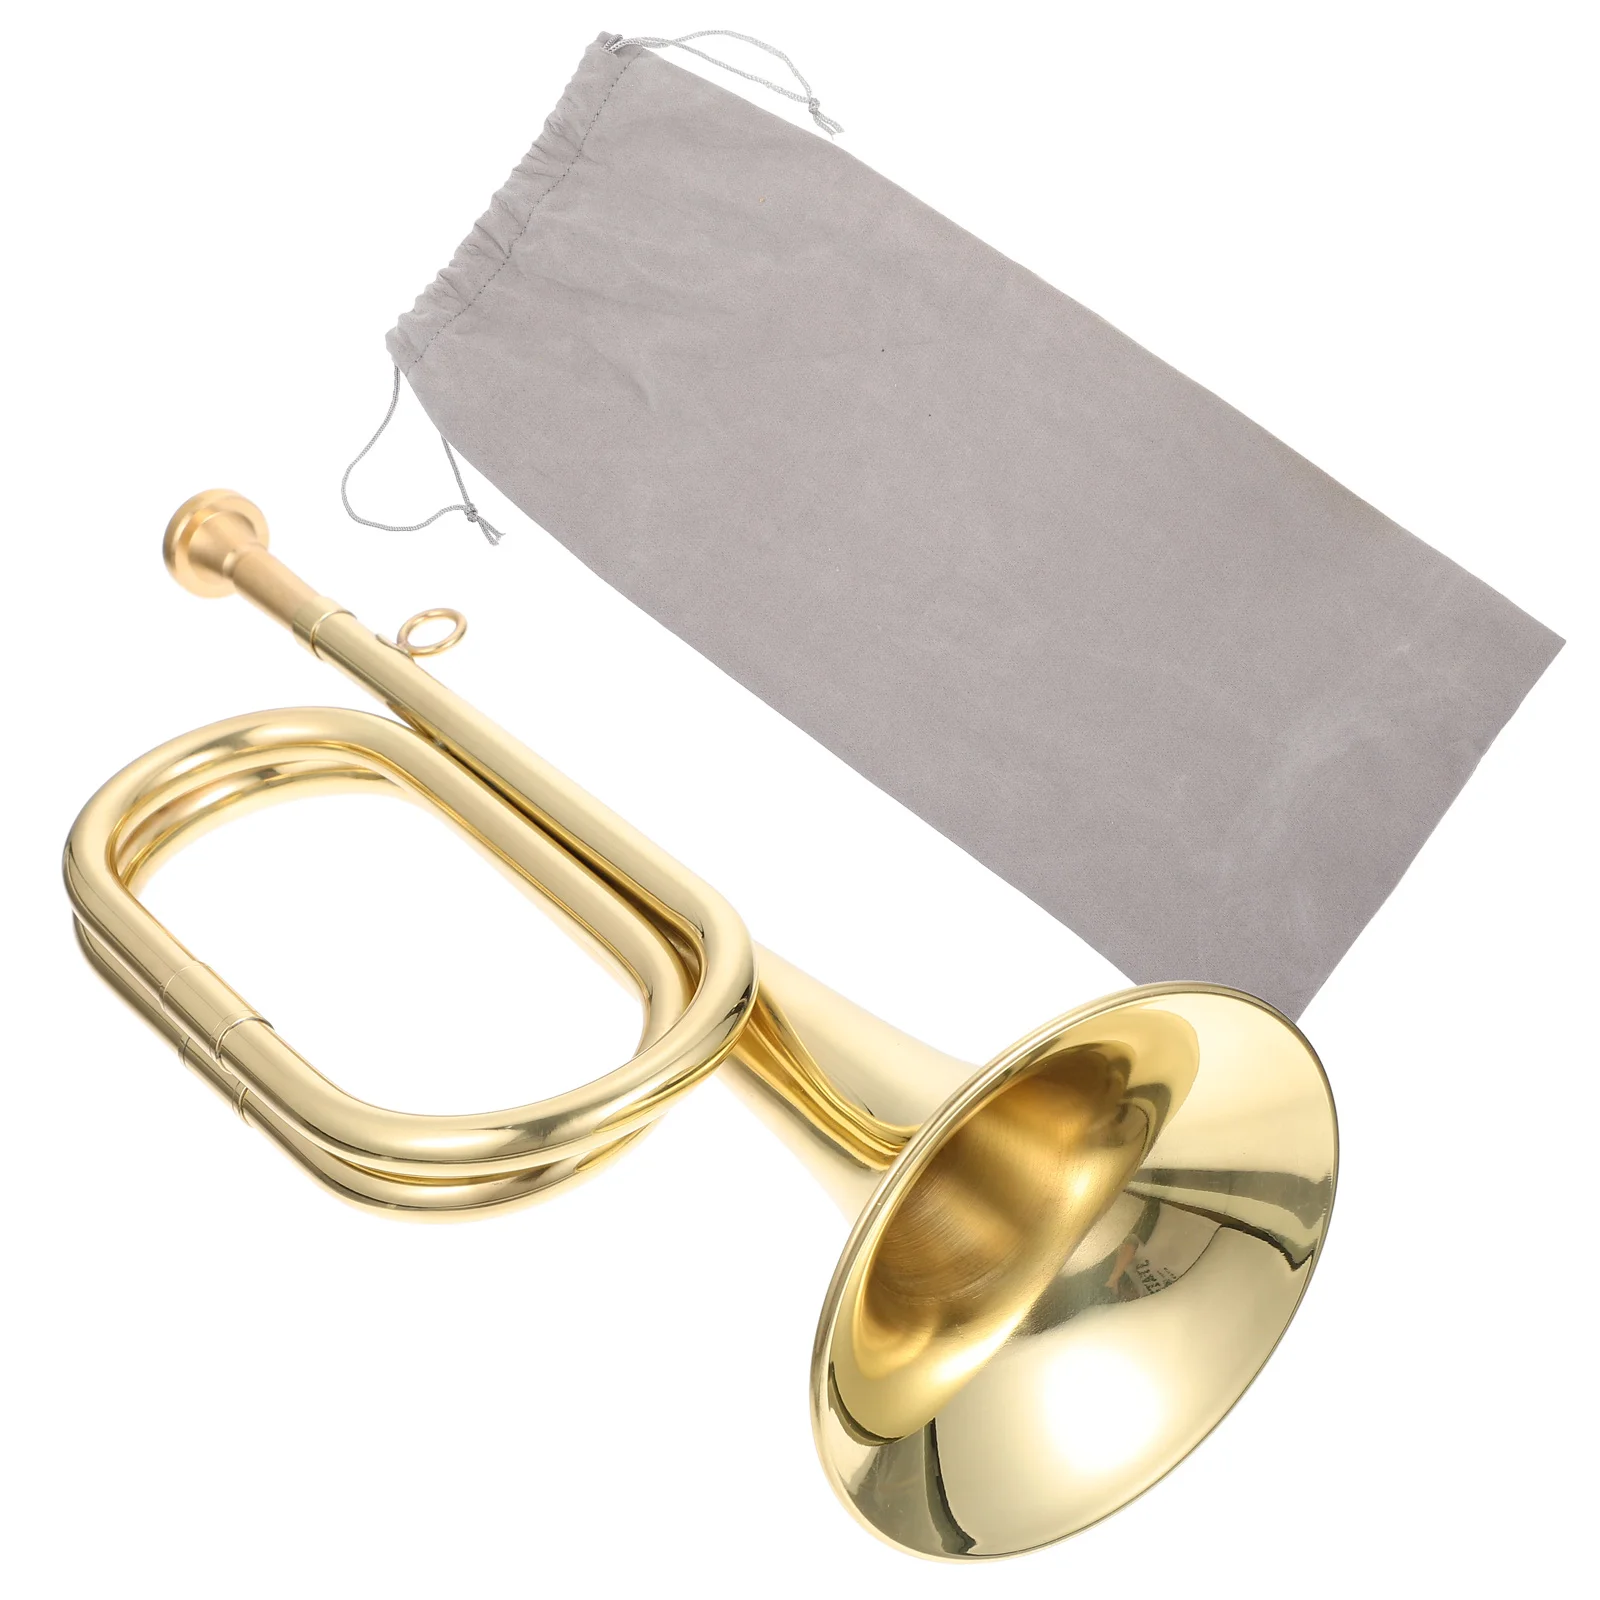 

Brass Bugle Call Trumpet Brass Cavalry Horn with Mouthpiece for School Band Cavalry Orchestra Brass Musical Instrument